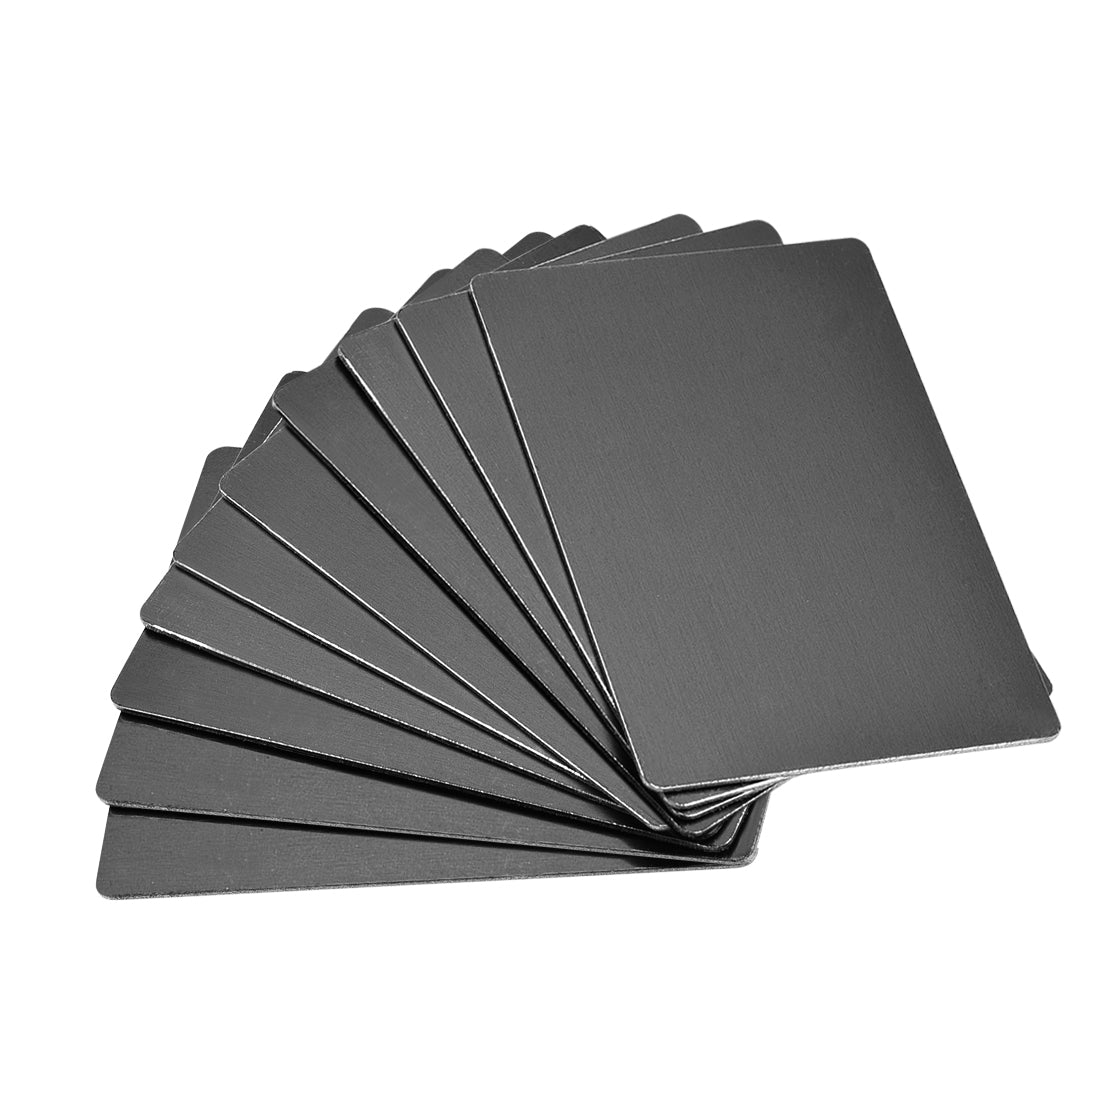 Uxcell Uxcell Blank Metal Business Card 88x53x0.5mm Anodized Aluminum Plate for DIY Laser Printing Black 10 Pcs